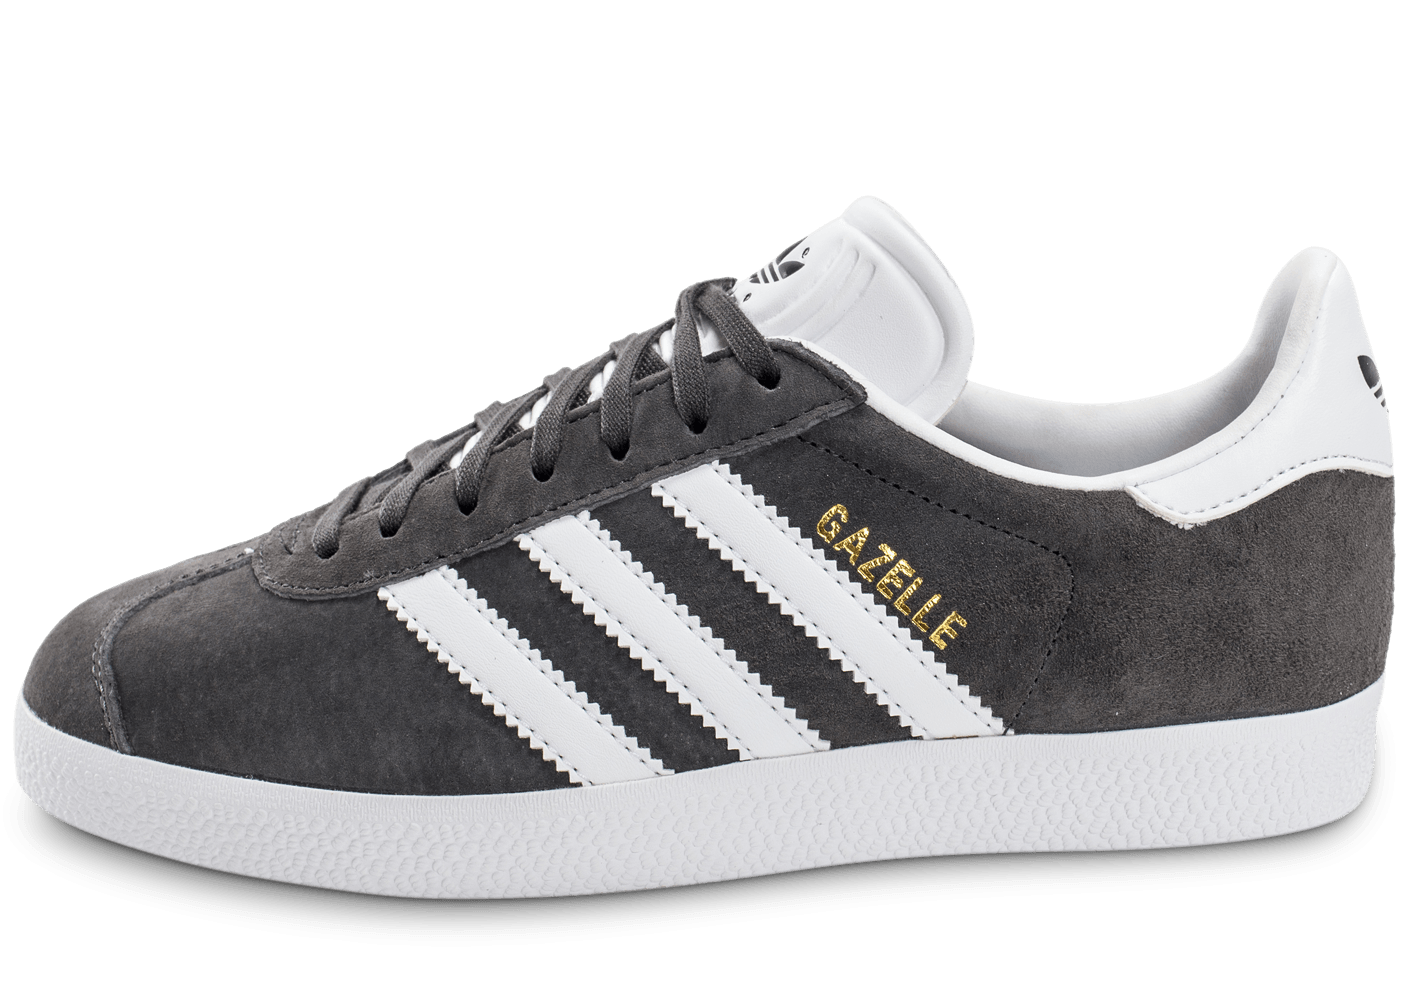 adidas homme gazelle grise,Free Shipping,OFF62%,in stock!